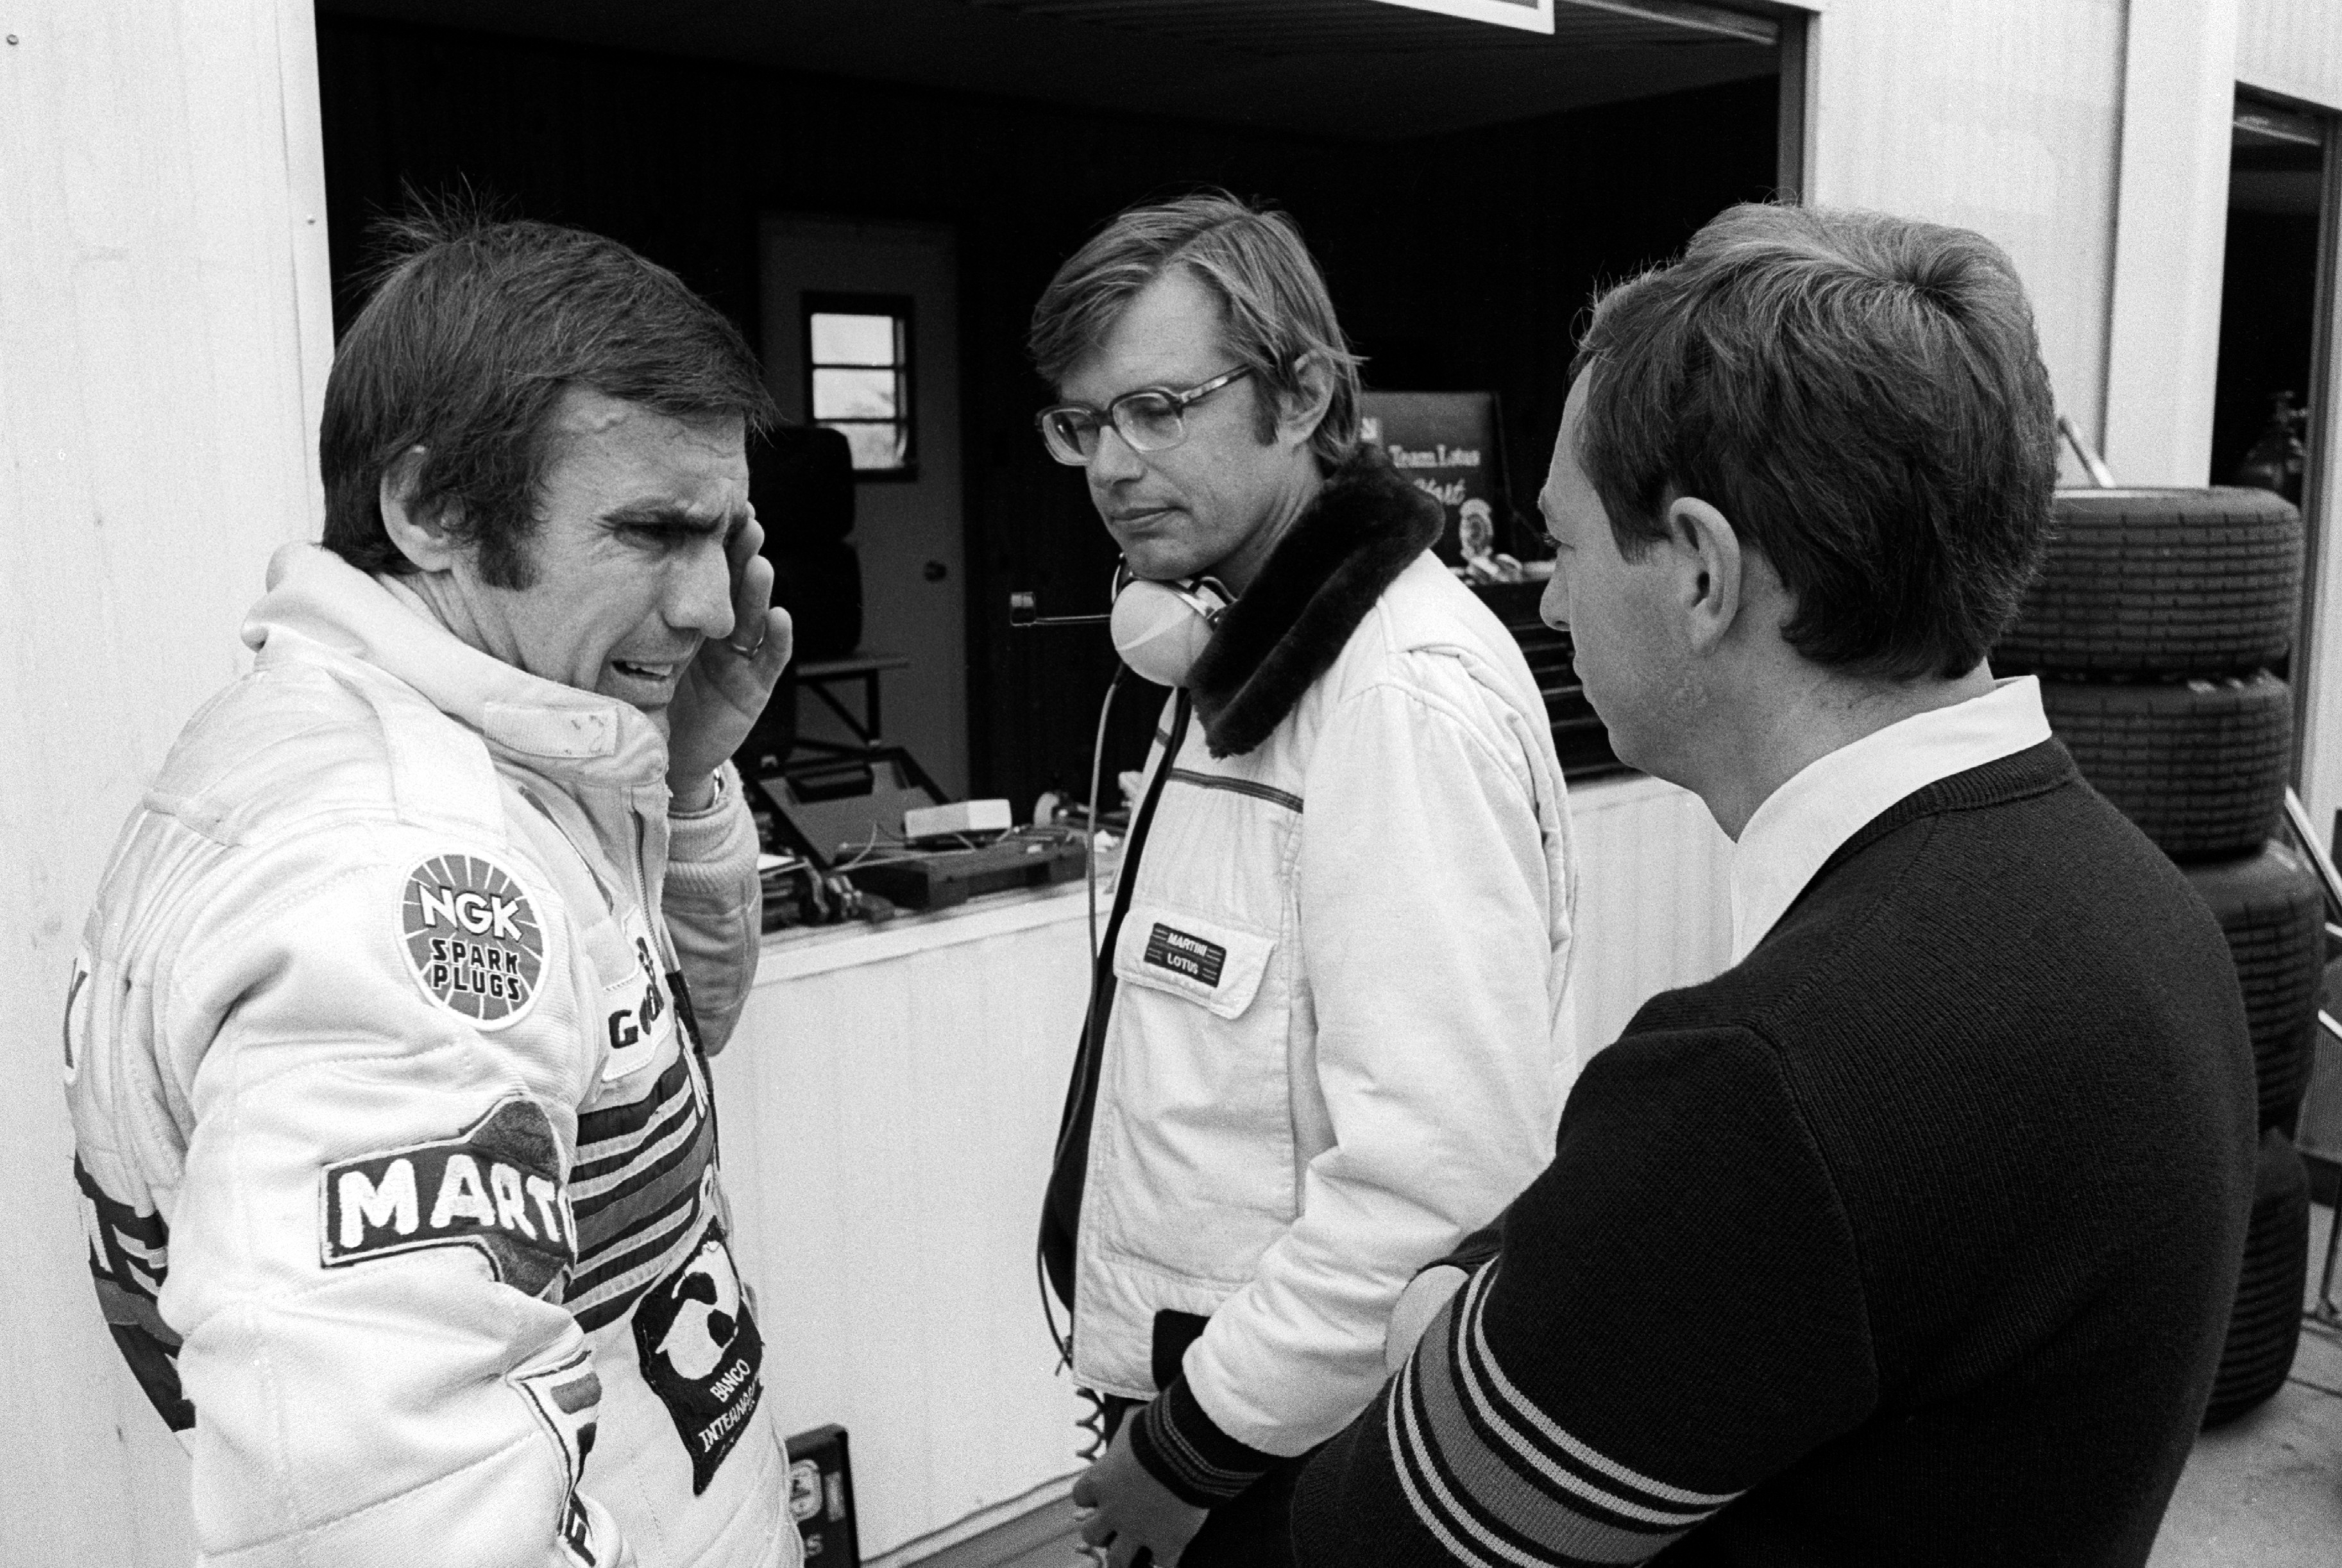 Carlos Reutemann (ARG) Lotus (Left), who retired from the race on lap 24 with a broken suspension, with Peter Collins (AUS) Lotus Team Manager (Right). Canadian Grand Prix, Rd 14, Montreal, Canada, 30 September 1979.